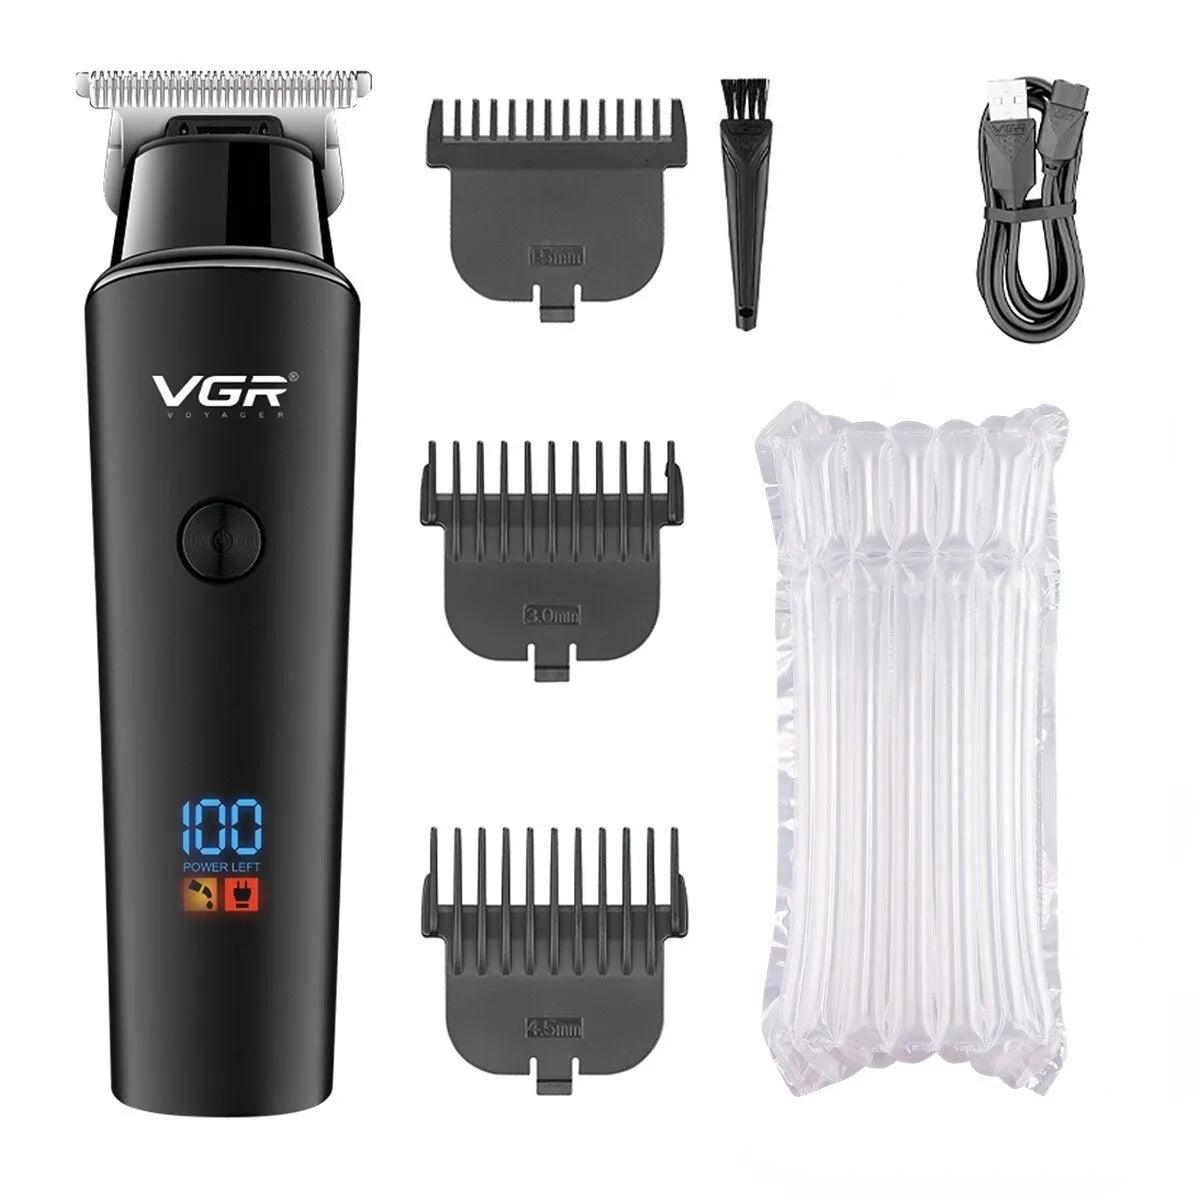 VGR Hair Trimmer Professional Electric Trimmers Cordless Hair Clipper Rechargeable LED Display V 937 - ADEEGA